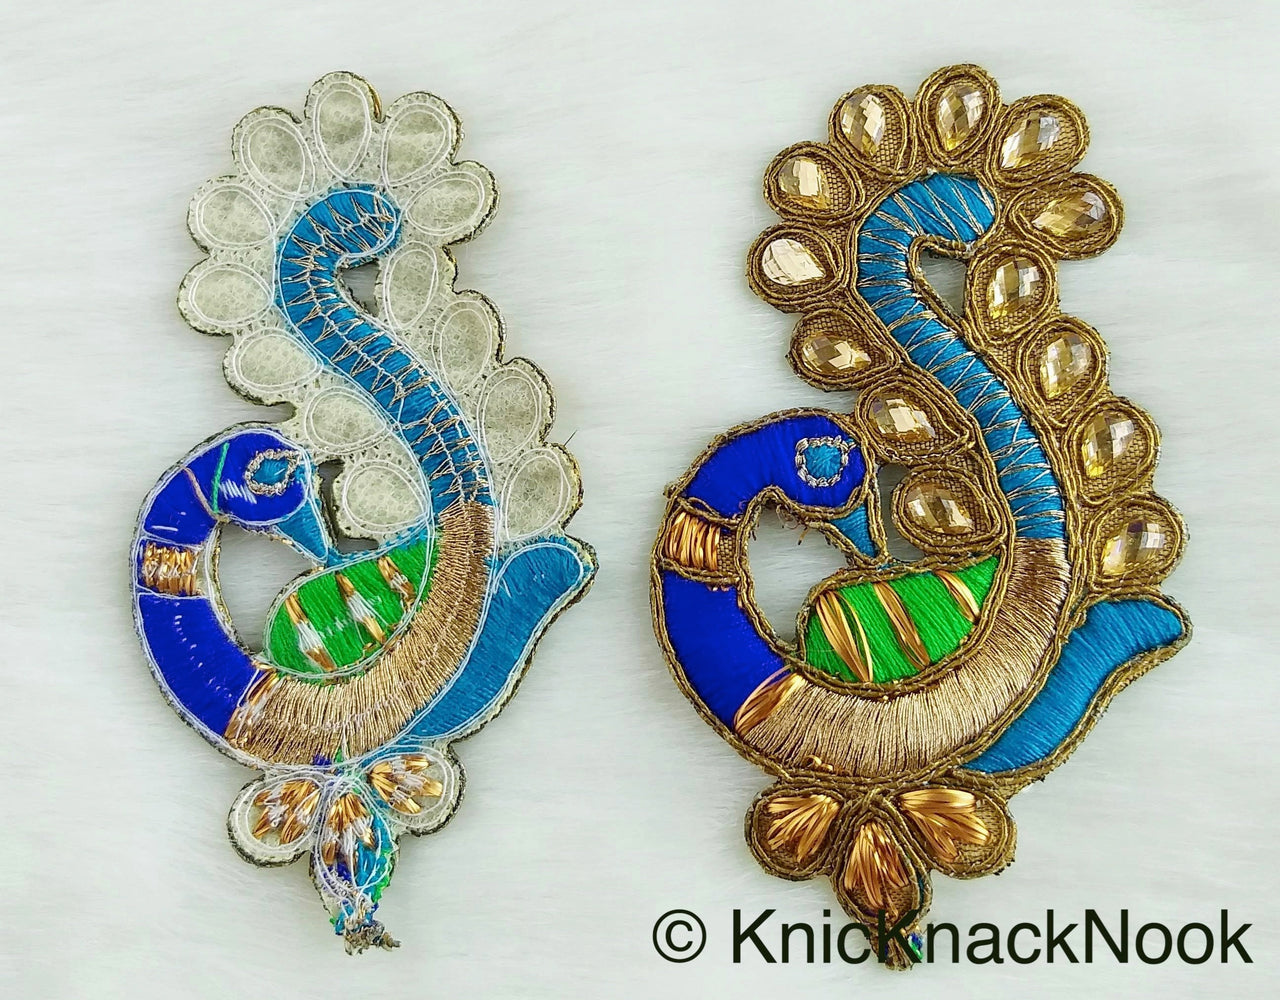 Cutwork Peacock Applique, Embroidered Peacock Applique with Bead Embellishments Blue, Green And Antique Gold